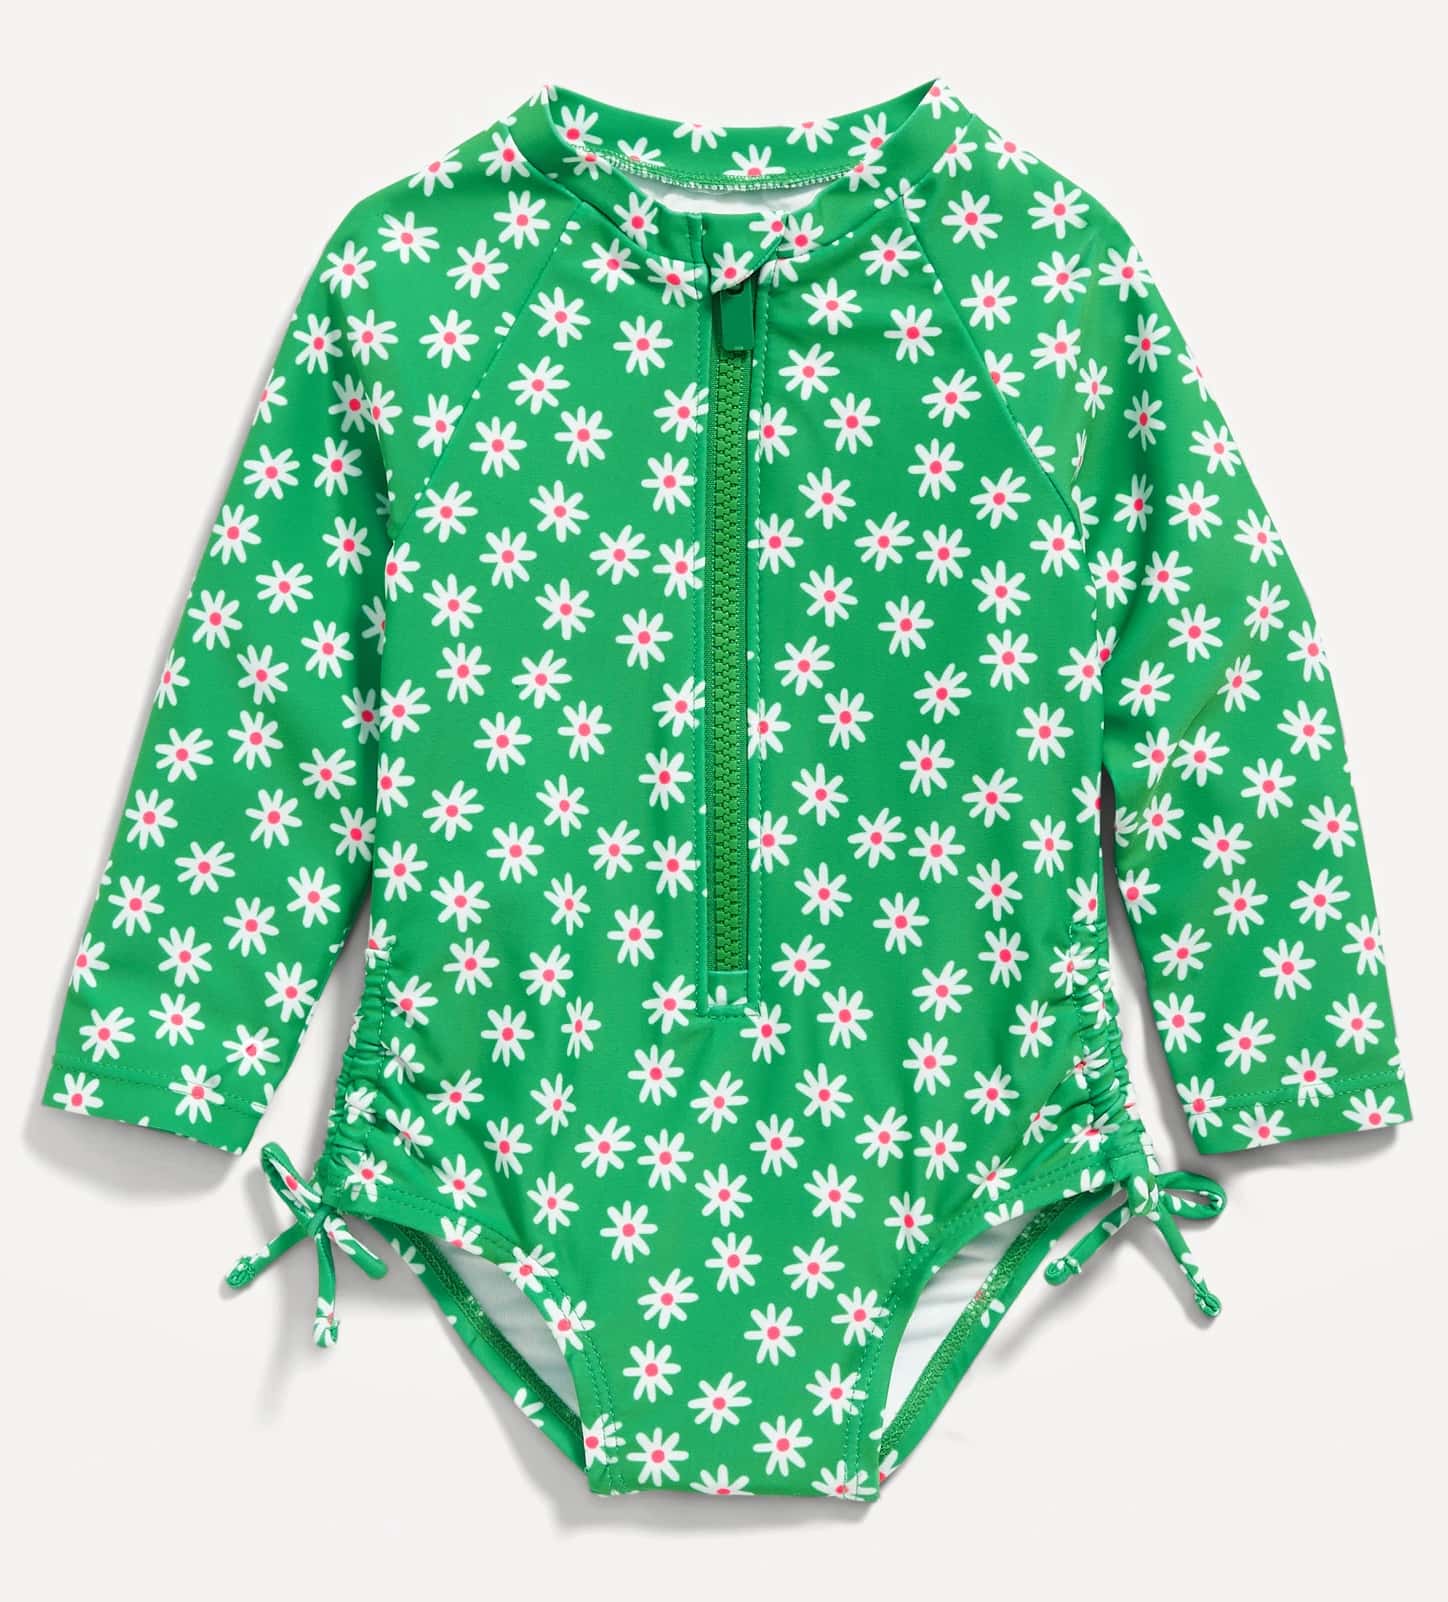 Green daisy print one-piece long-sleeve bathing suit 